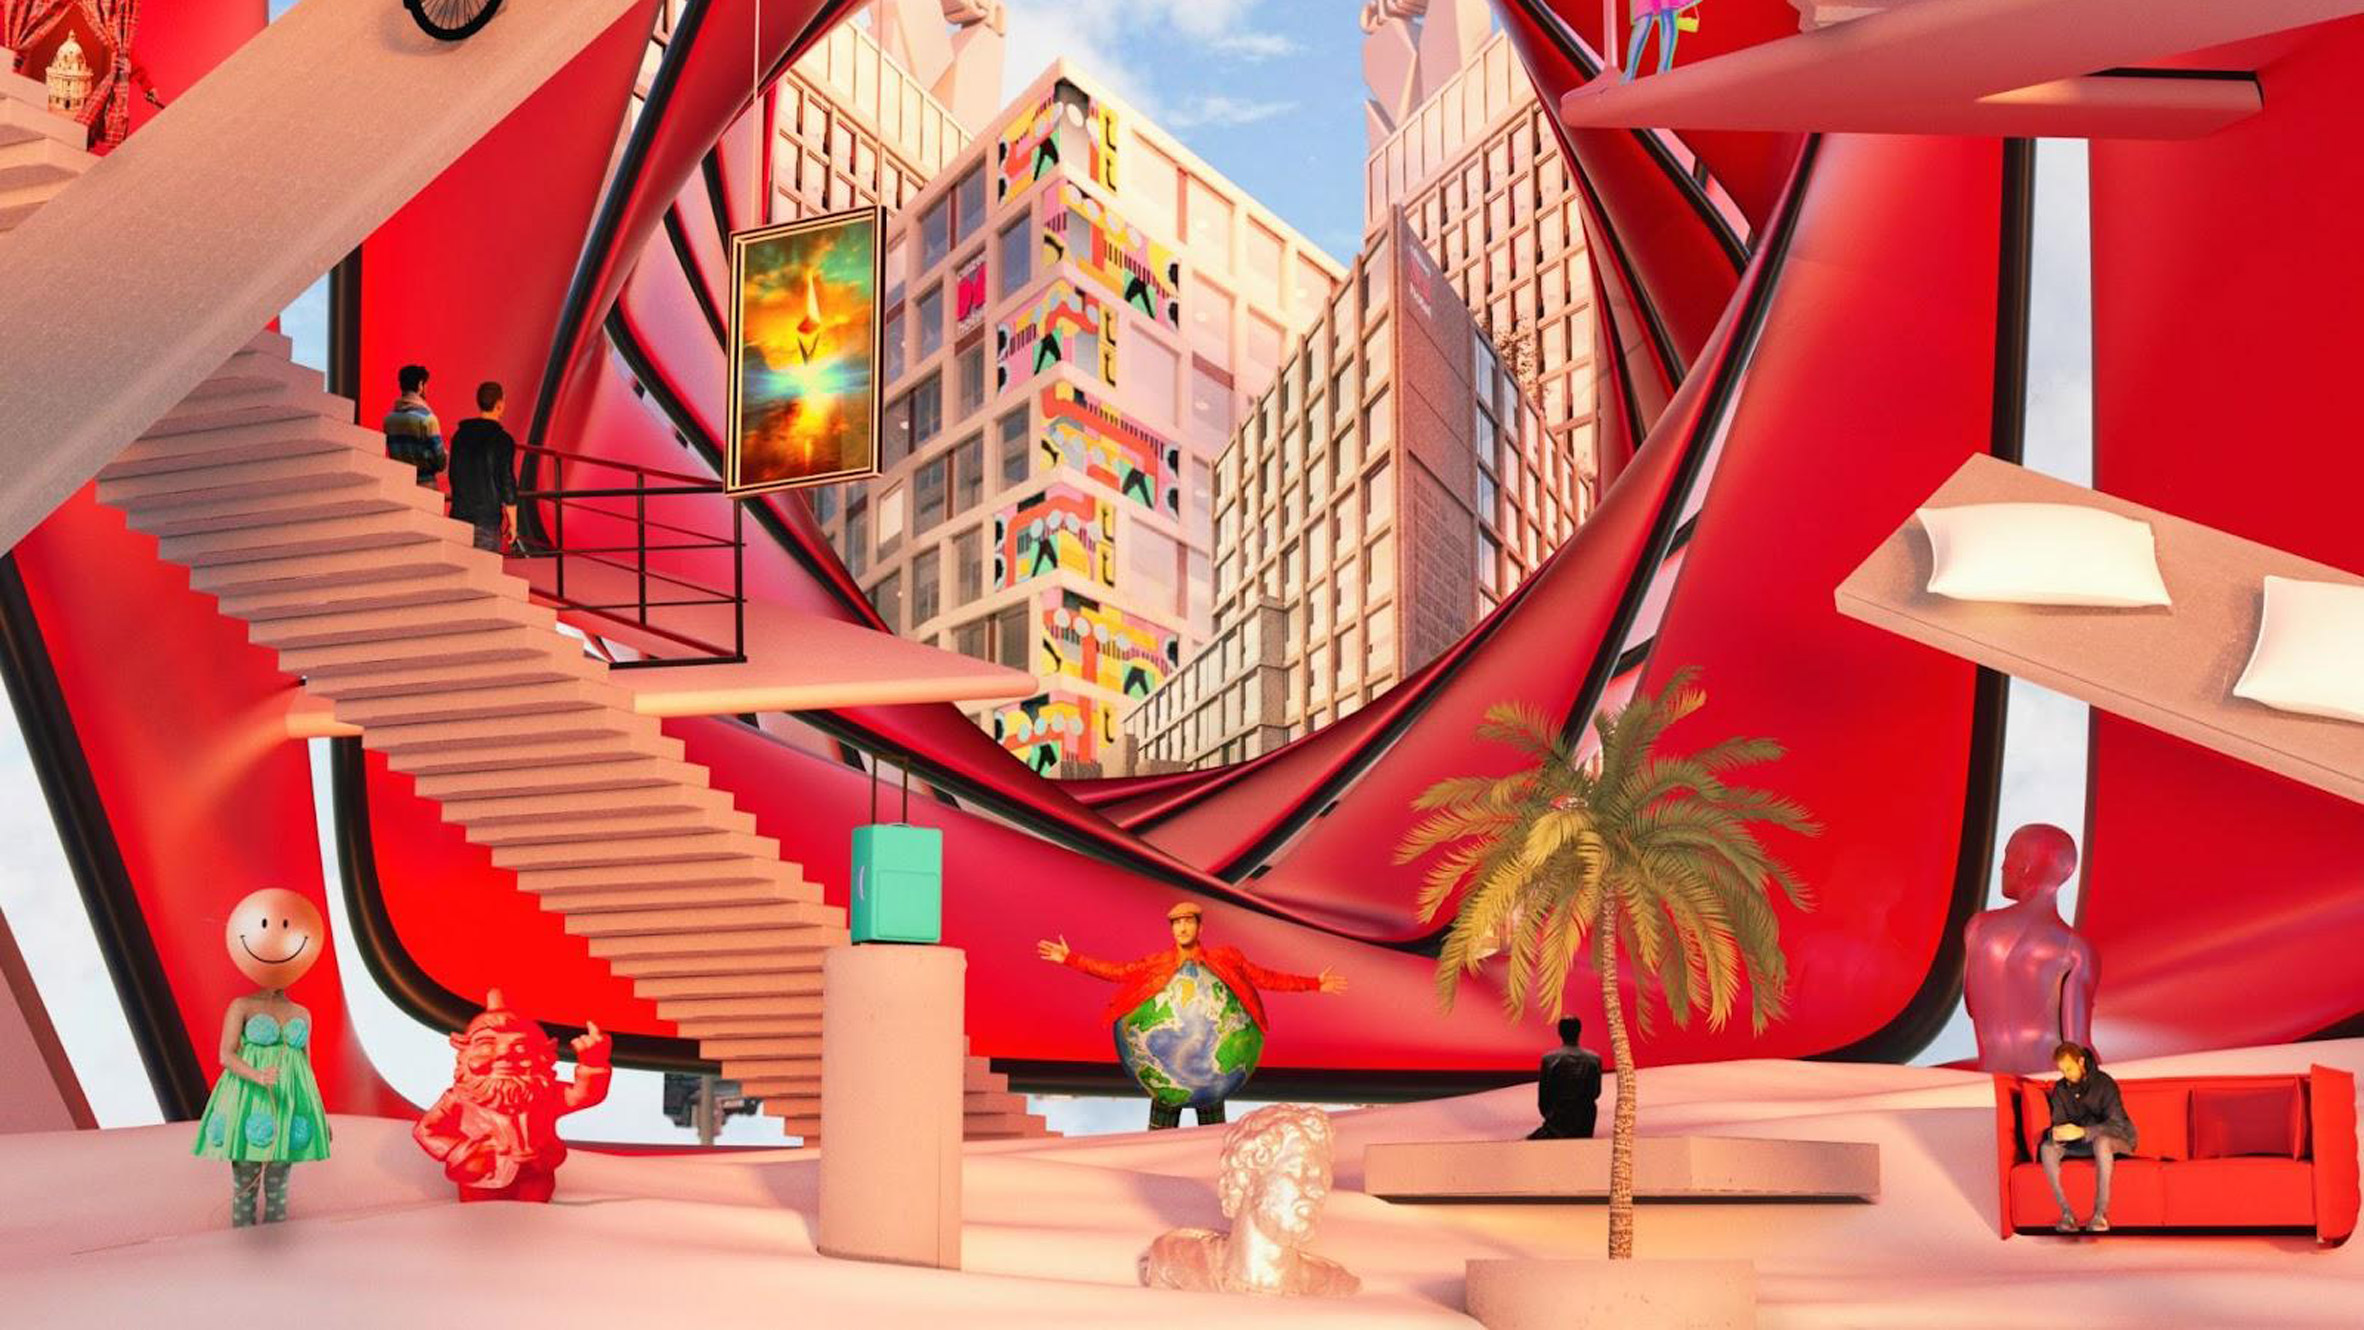 citizenm metaverse hotel the